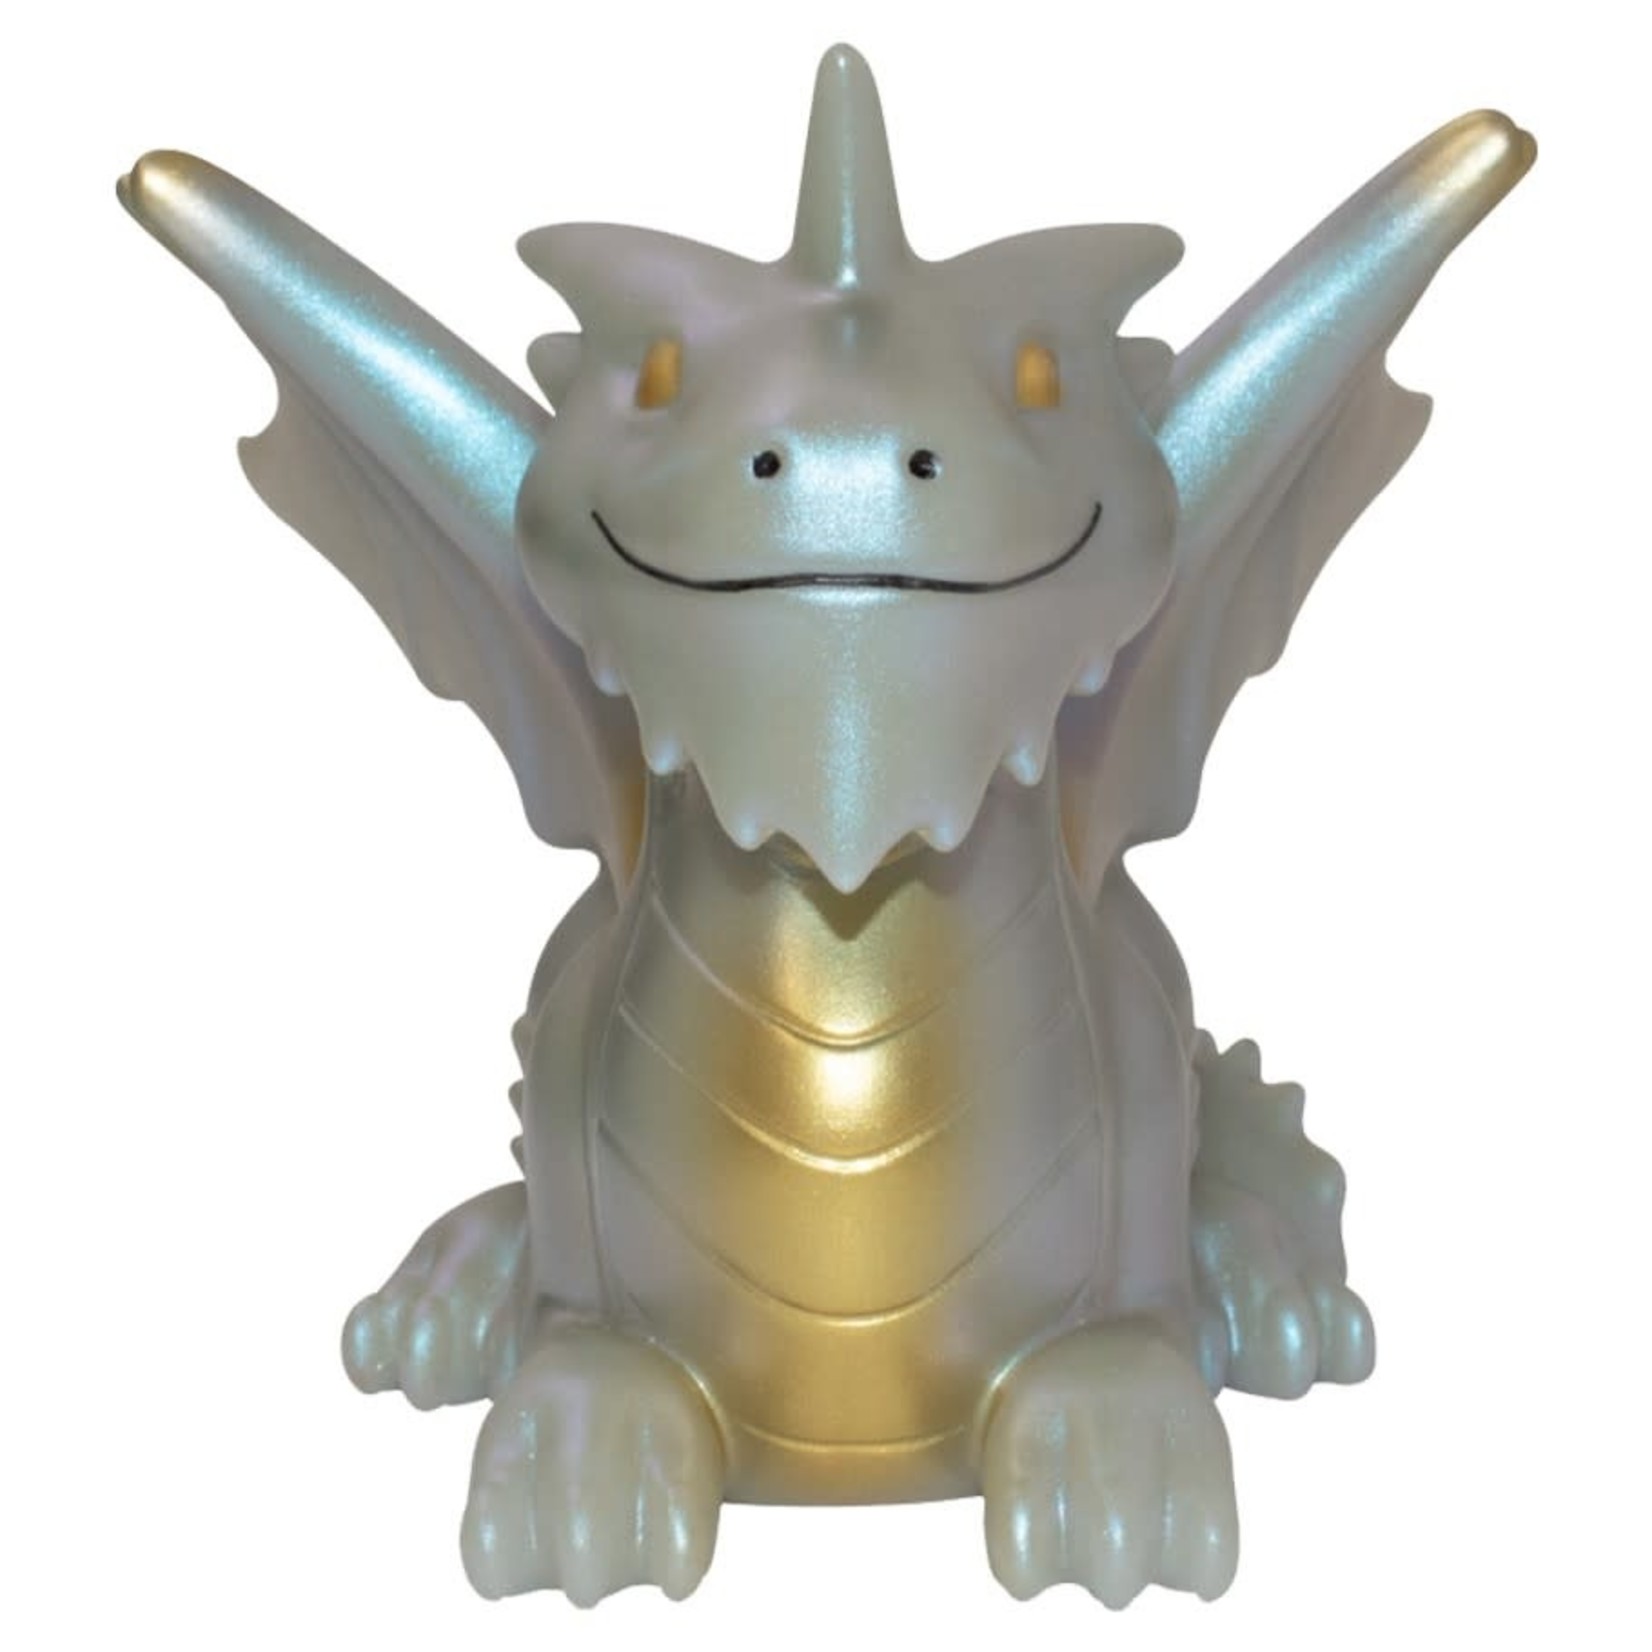 D&D Figurines of Adorable Power - Silver Dragon